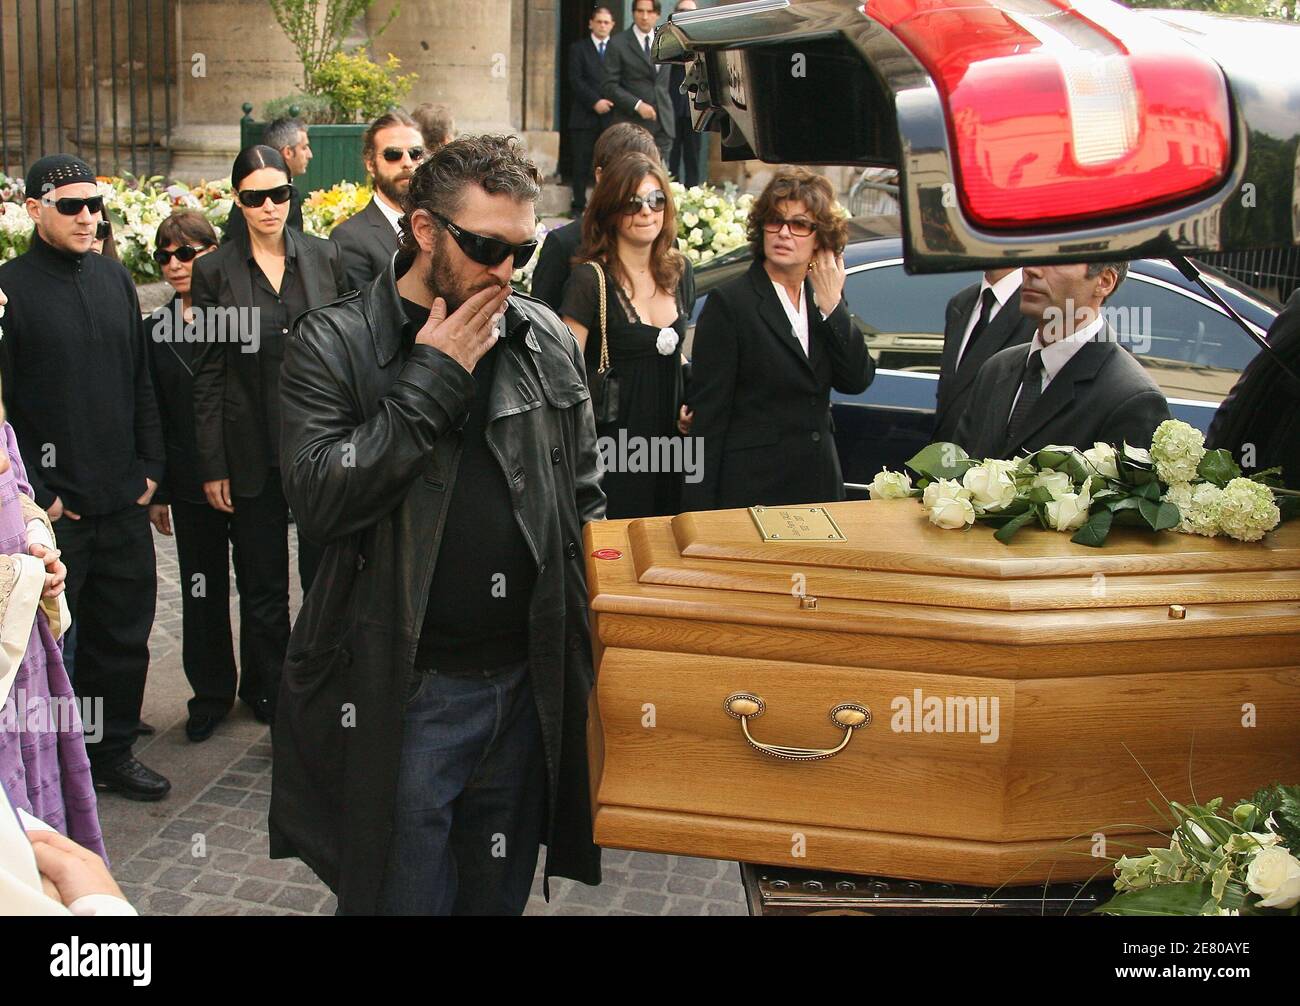 Vincent Cassel in front of the coffin during the funeral service of his  father French actor Jean-Pierre Cassel at Saint-Eustache church in Paris,  France on April 26, 2007. Cassel died of cancer